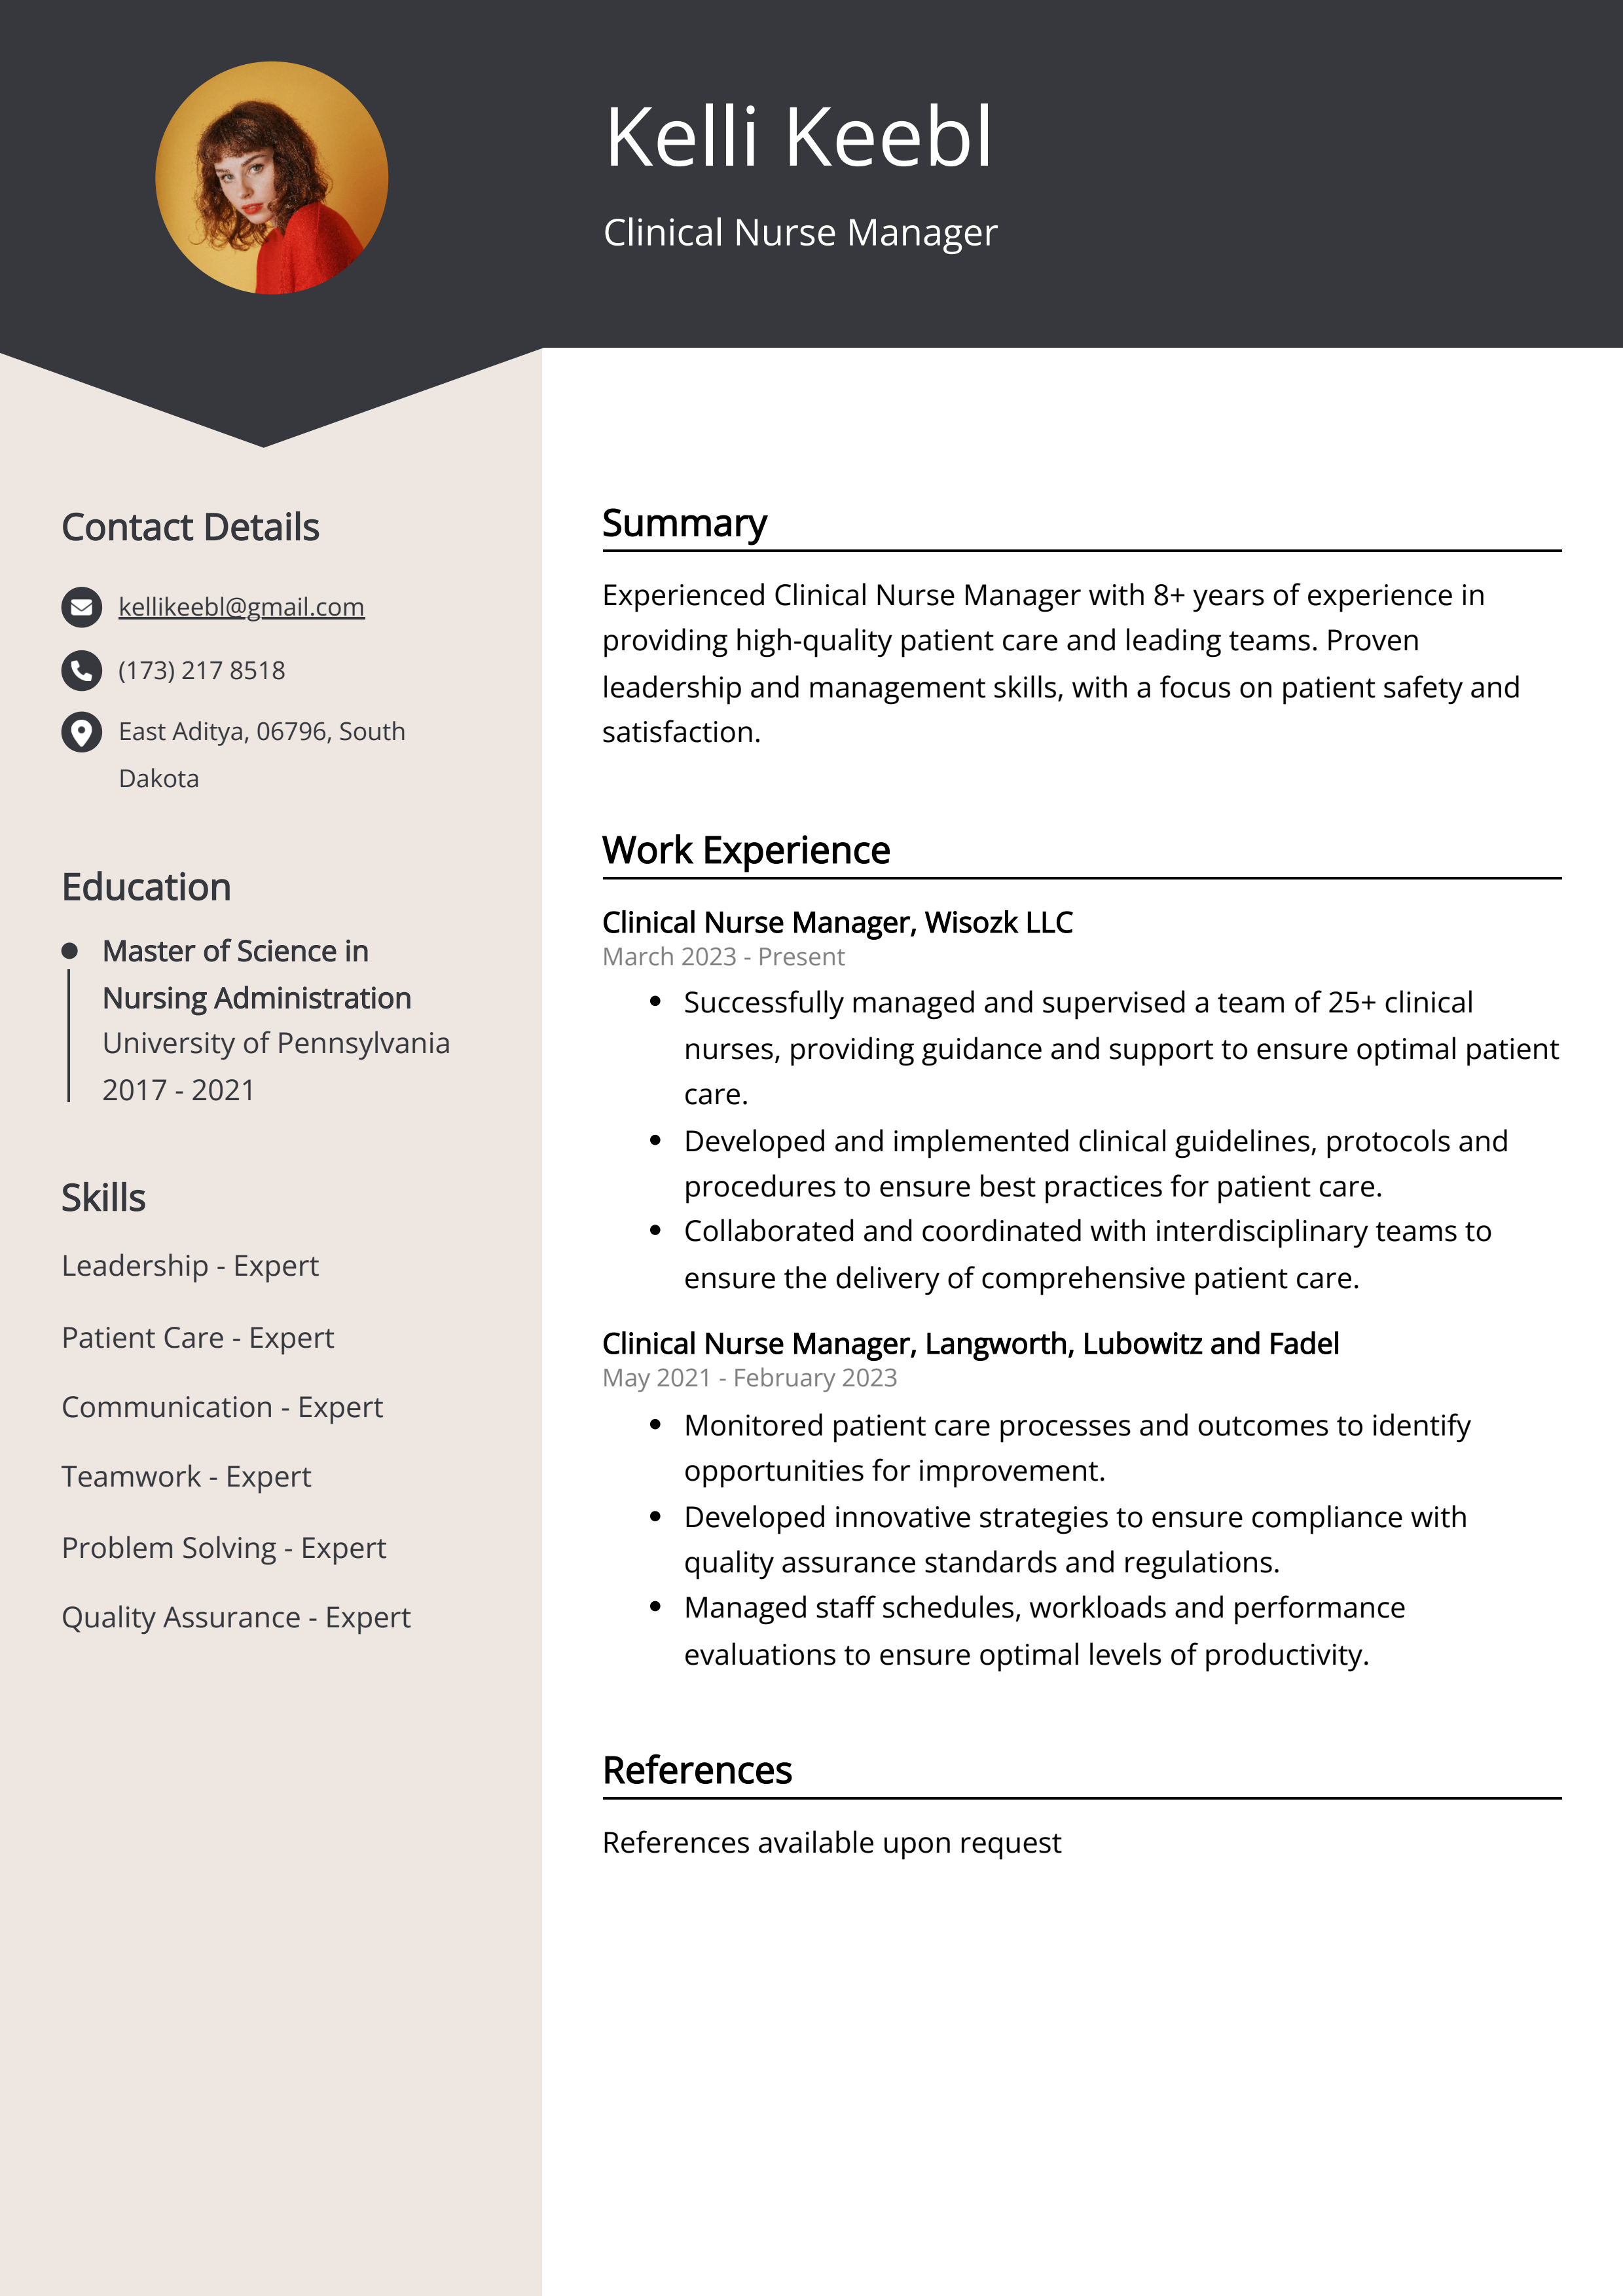 Clinical Nurse Manager Resume Example